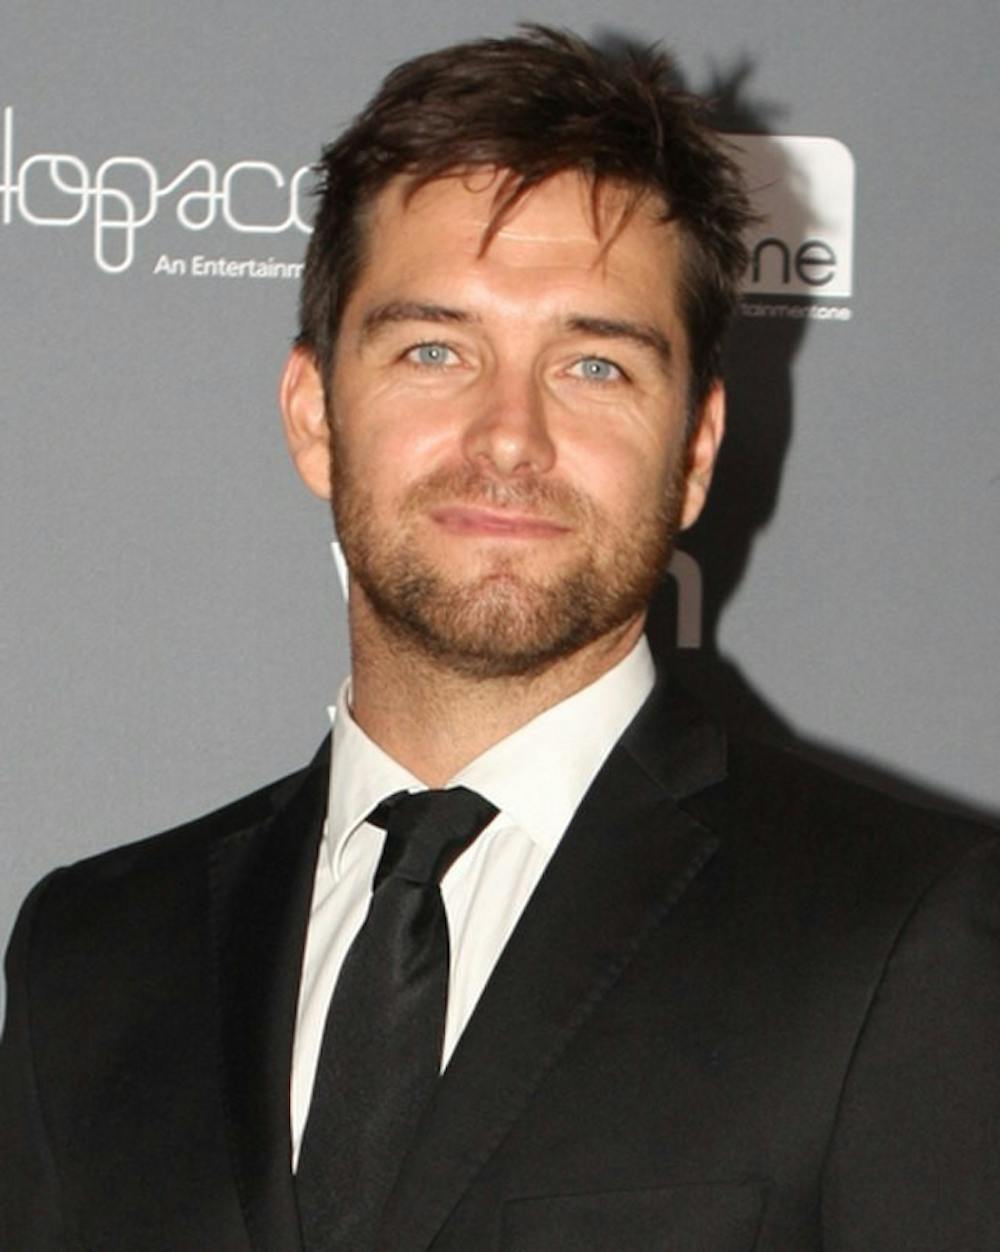 Antony Starr, pictured here at the premiere of "Wish You Were Here" in 2012, stars as the controversial character "Homelander" in the superhero satire "The Boys."